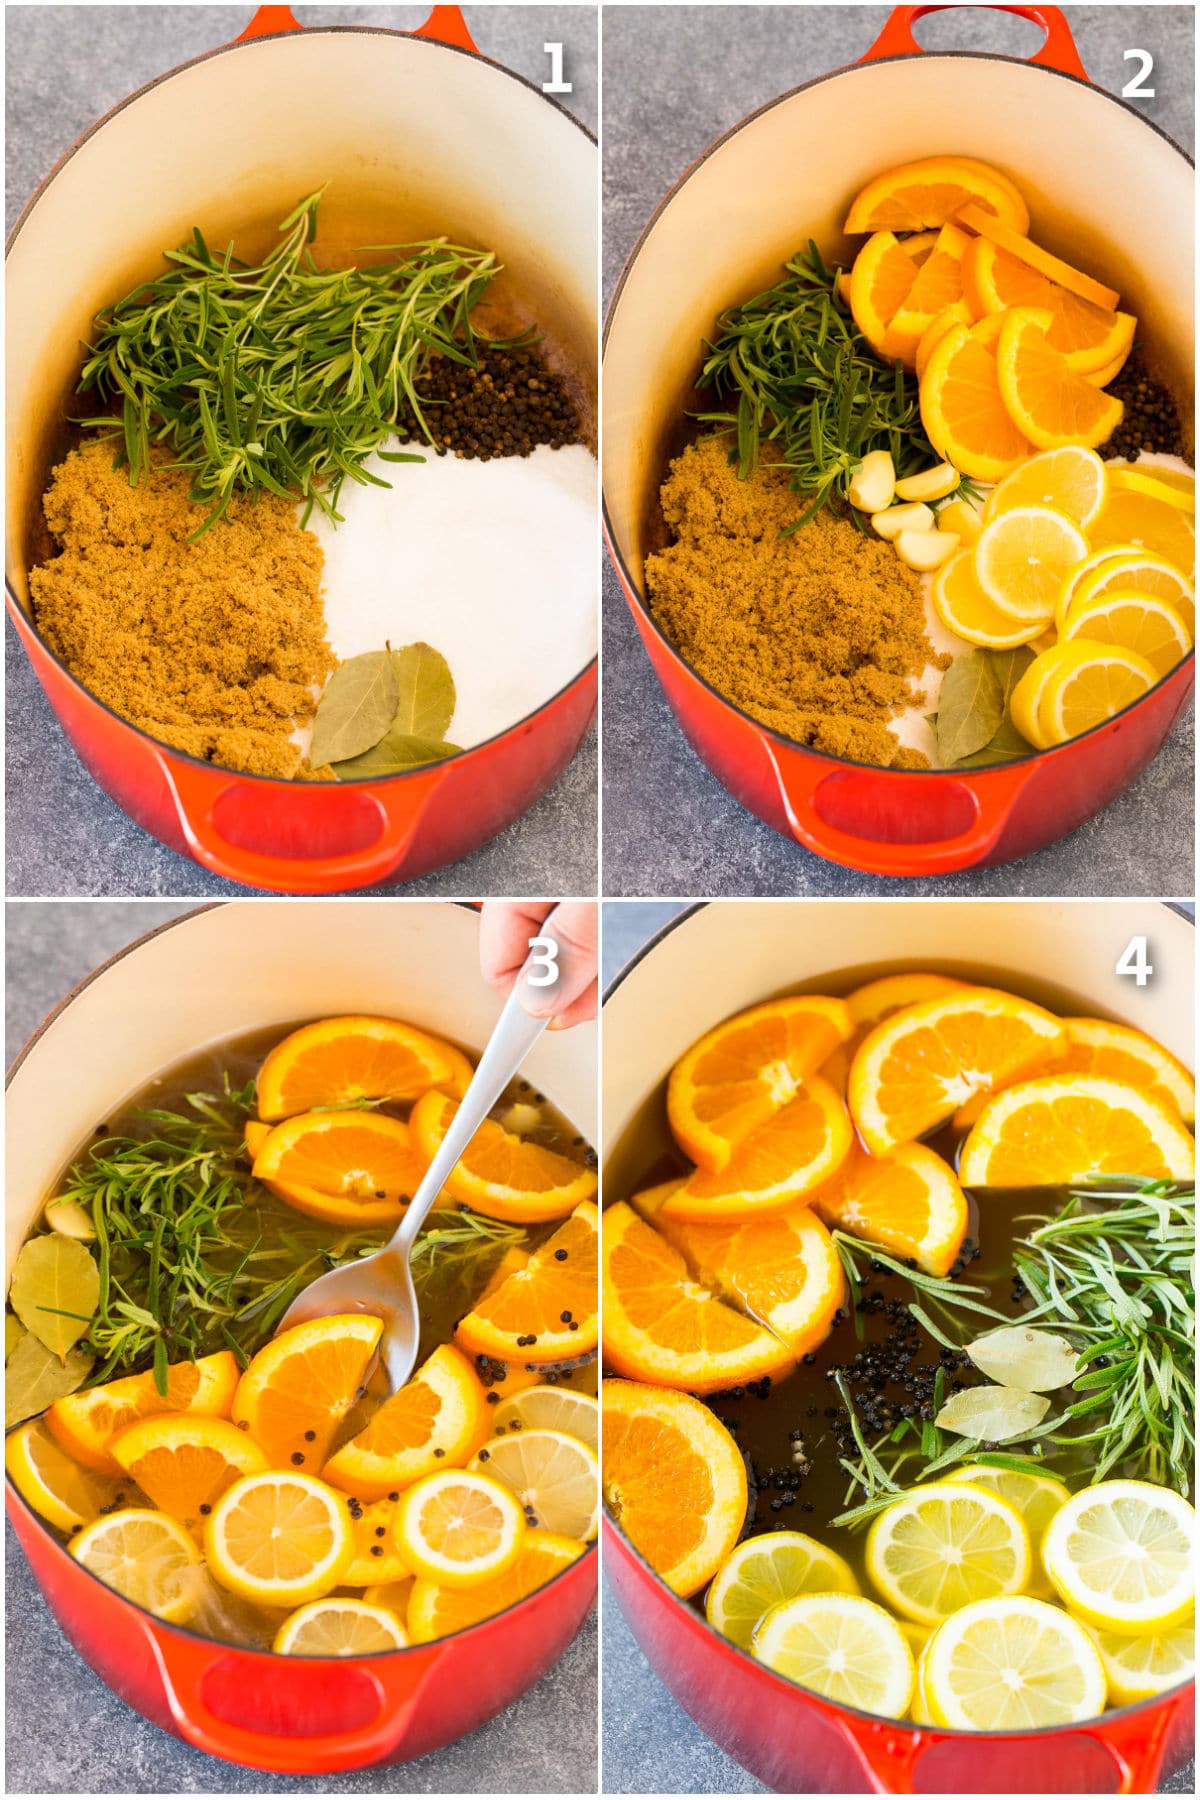 Step by step process shots showing how to make turkey brine.